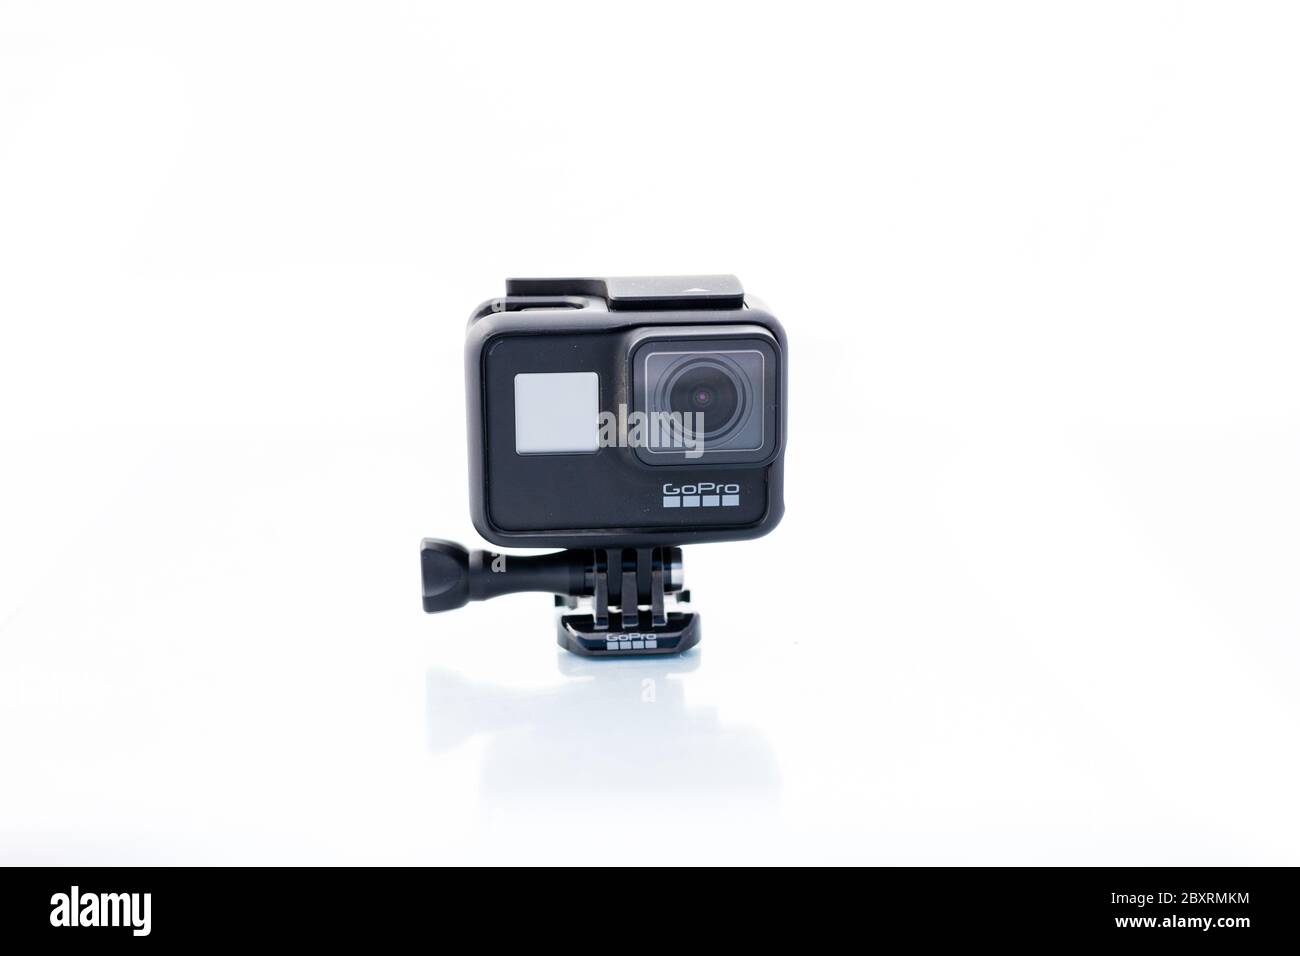 Suffolk, UK June 01 2020: GoPro Hero 7 Black action camera shot against a clean plain white background. GoPro is a small action camera commonly used i Stock Photo